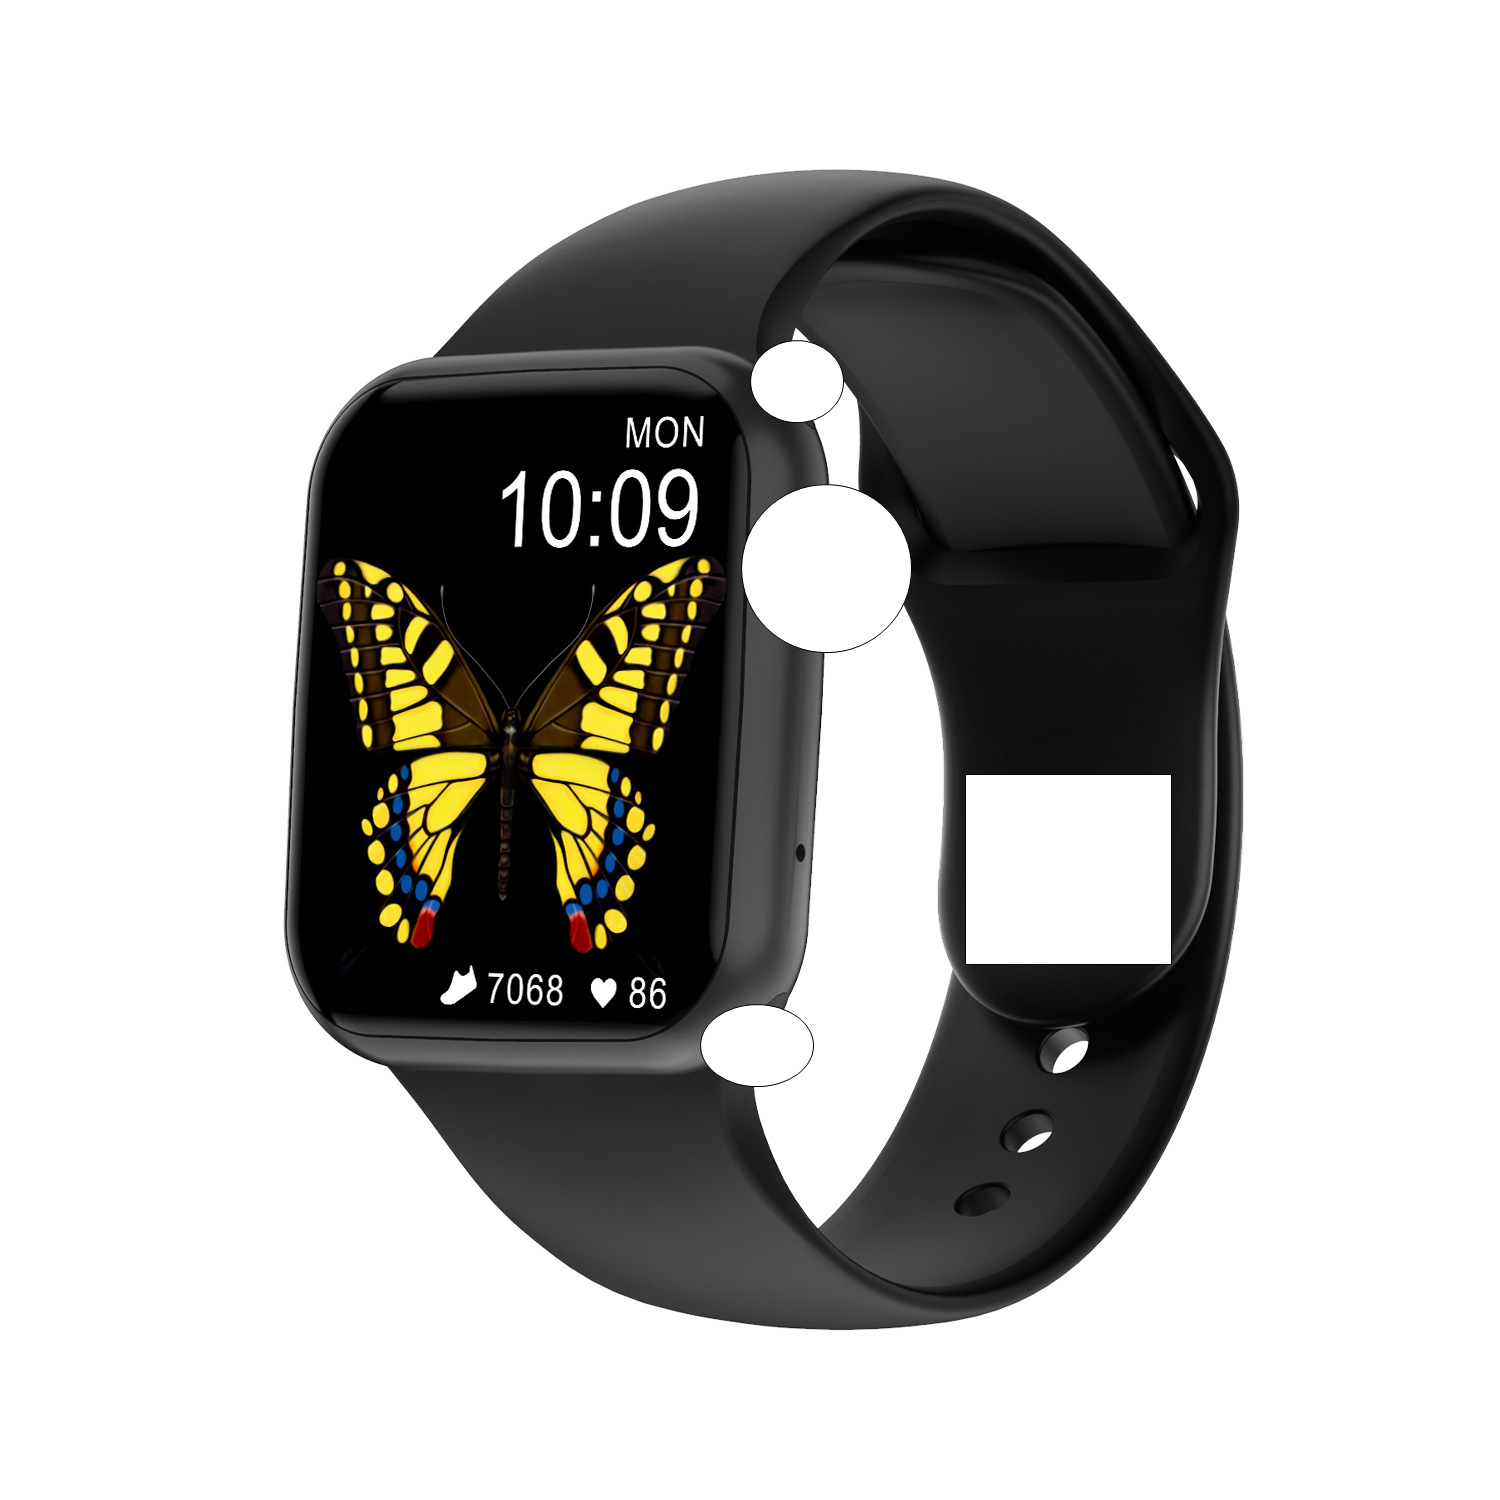 Smart Watch Bluetooth Hd Full-screen Android/ios